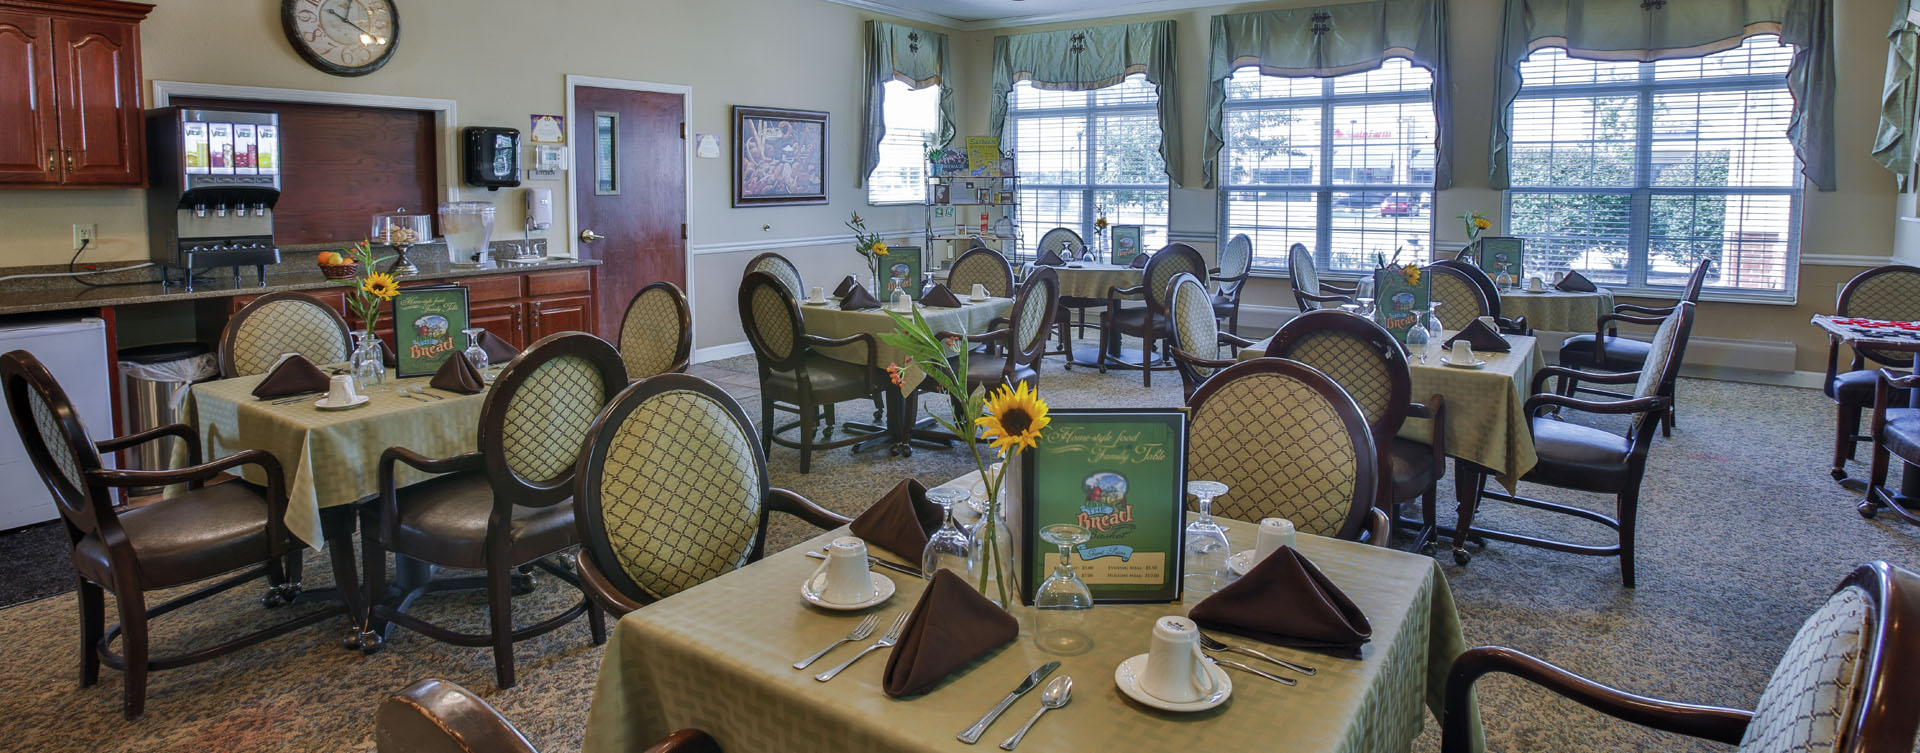 Enjoy restaurant -style meals served three times a day in our dining room at Bickford of Lafayette